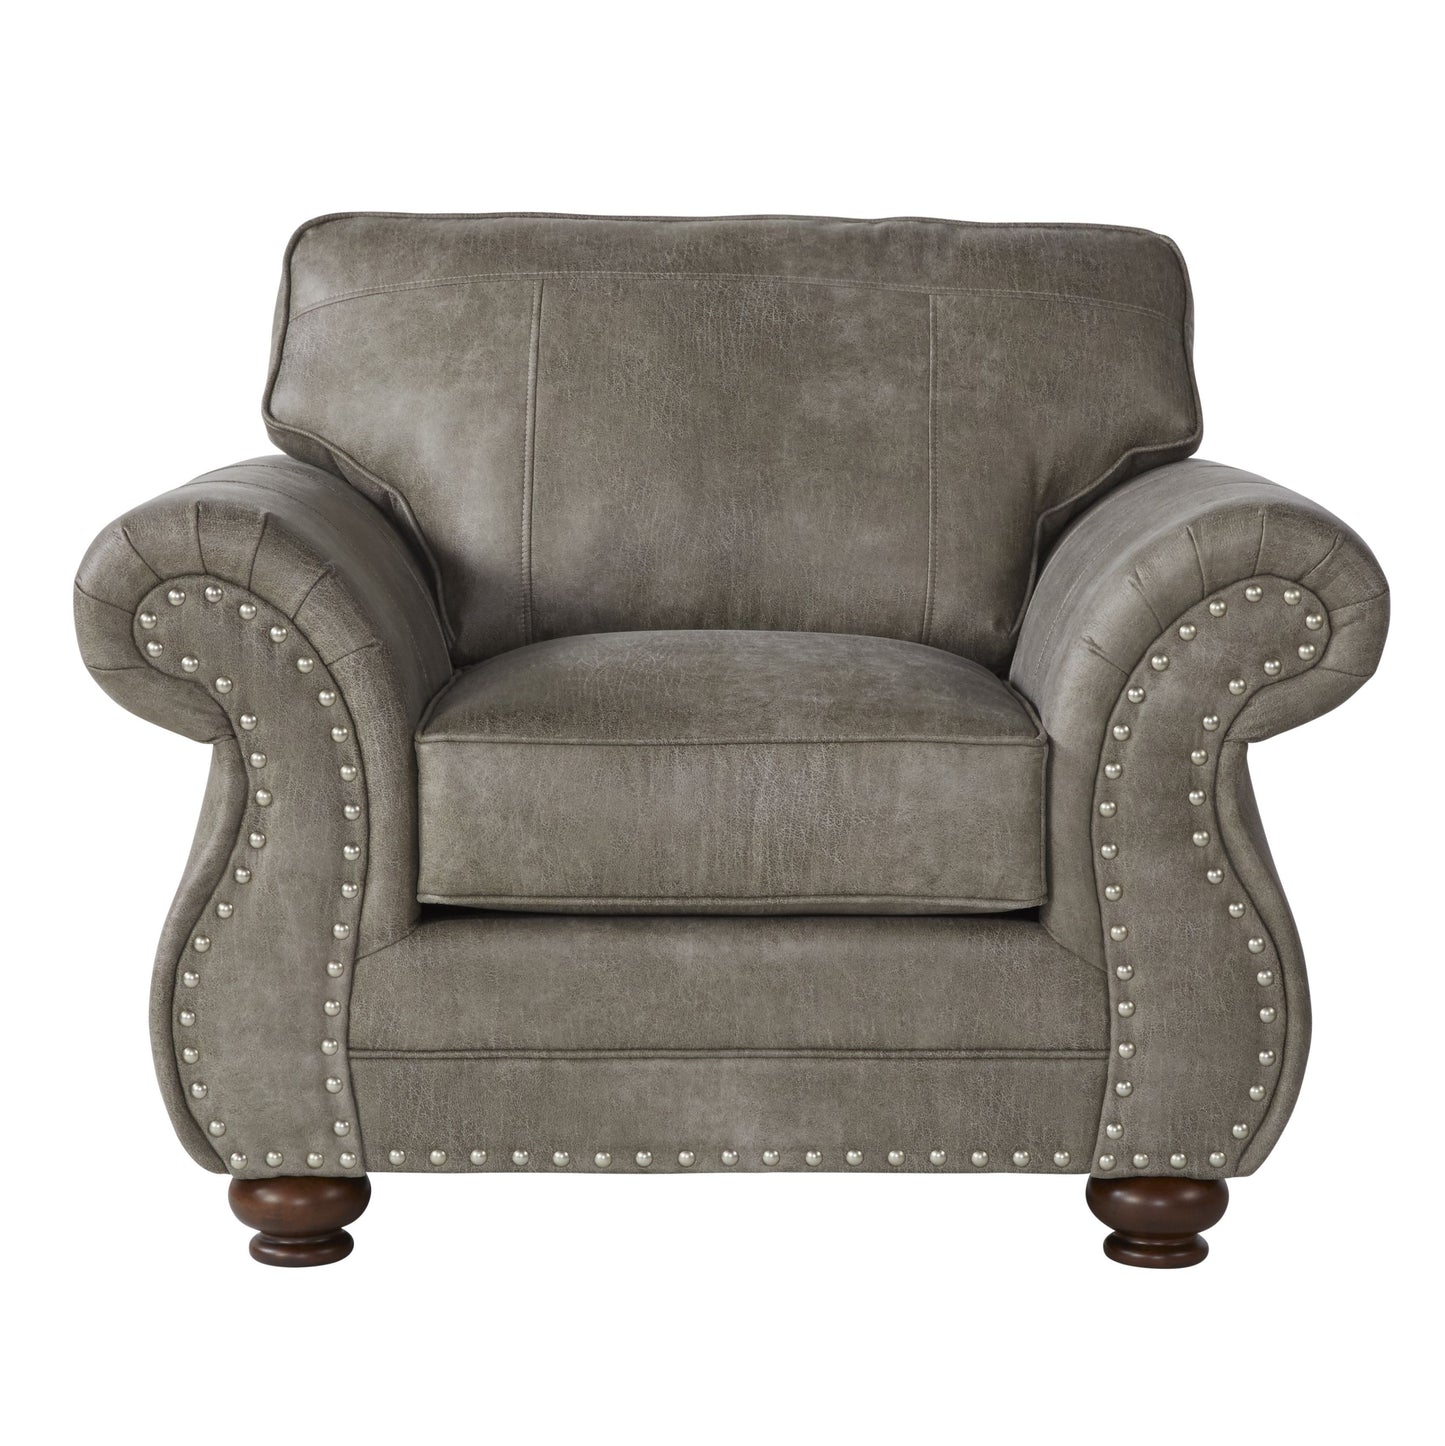 Leinster Faux Leather Upholstered Nailhead Chair in Stone Gray